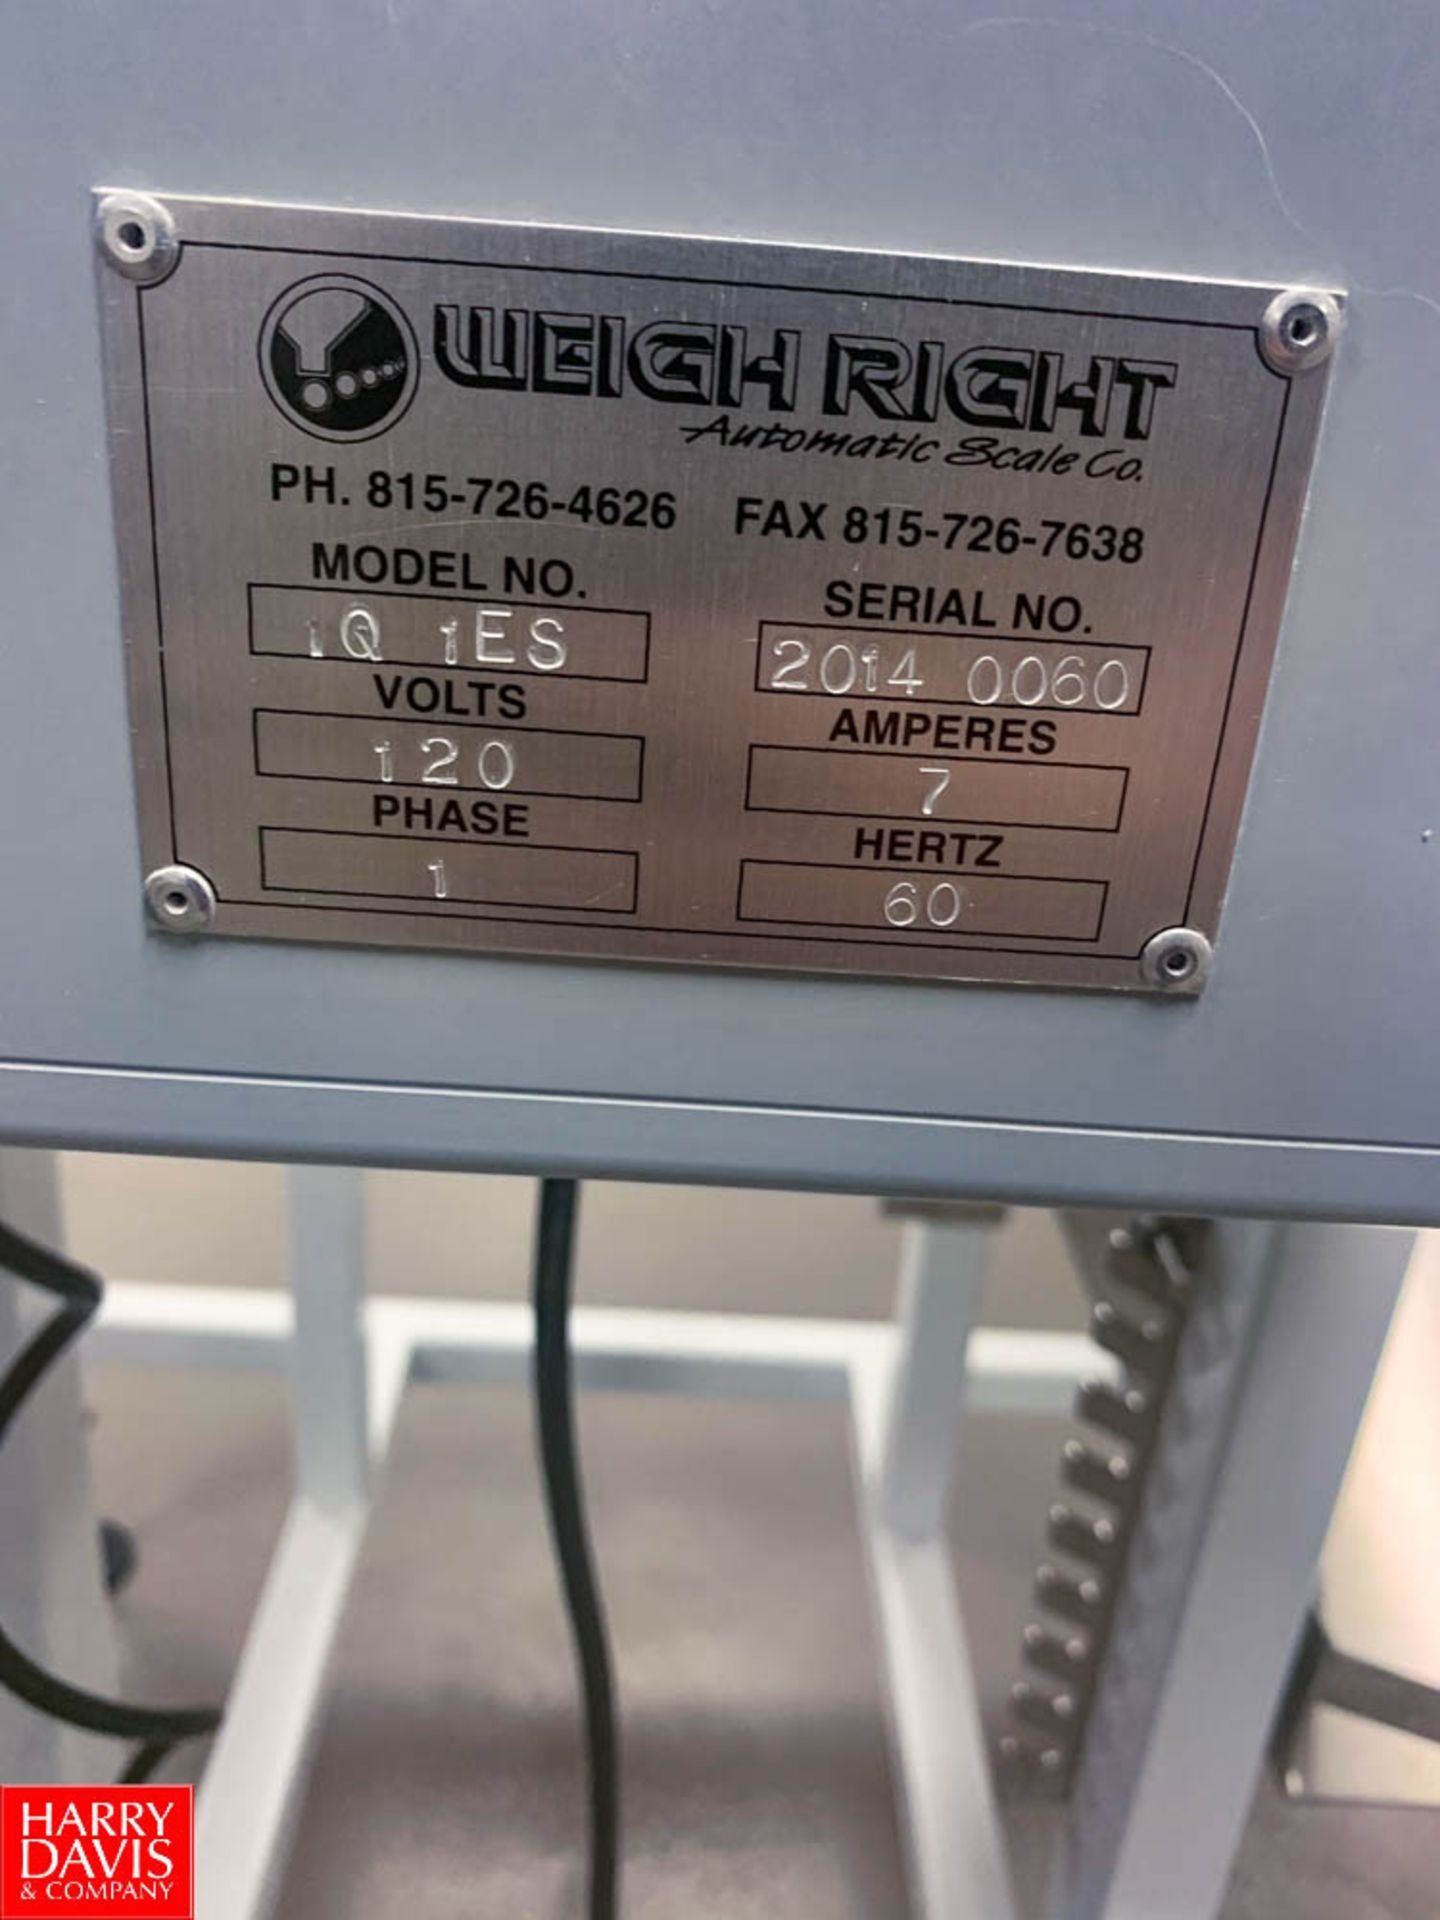 2014 Weigh-Right Scale Filler, S/N:50816340 Model: 1Q-1ES Rigging: $250 - Image 2 of 2